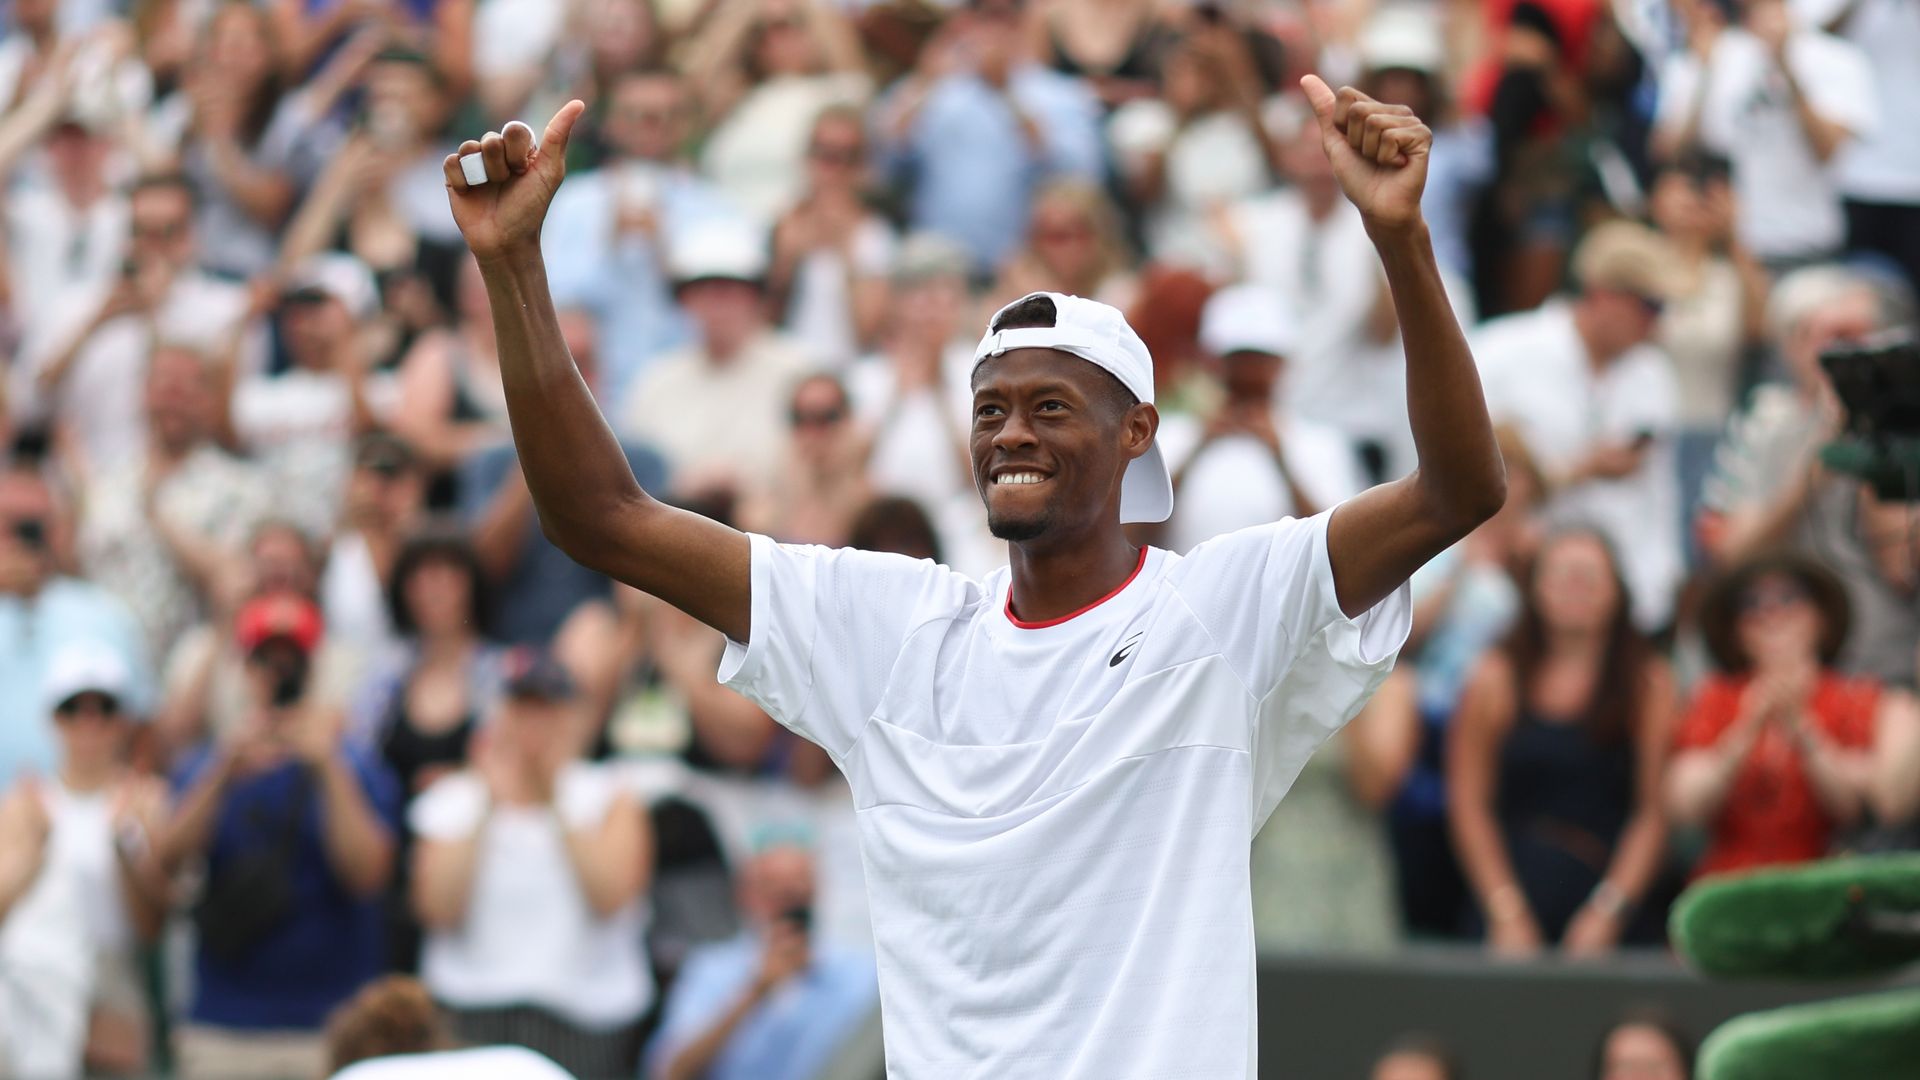 A tennis player wearing all white raises his hands in victory after winning a match against a top-ranked player